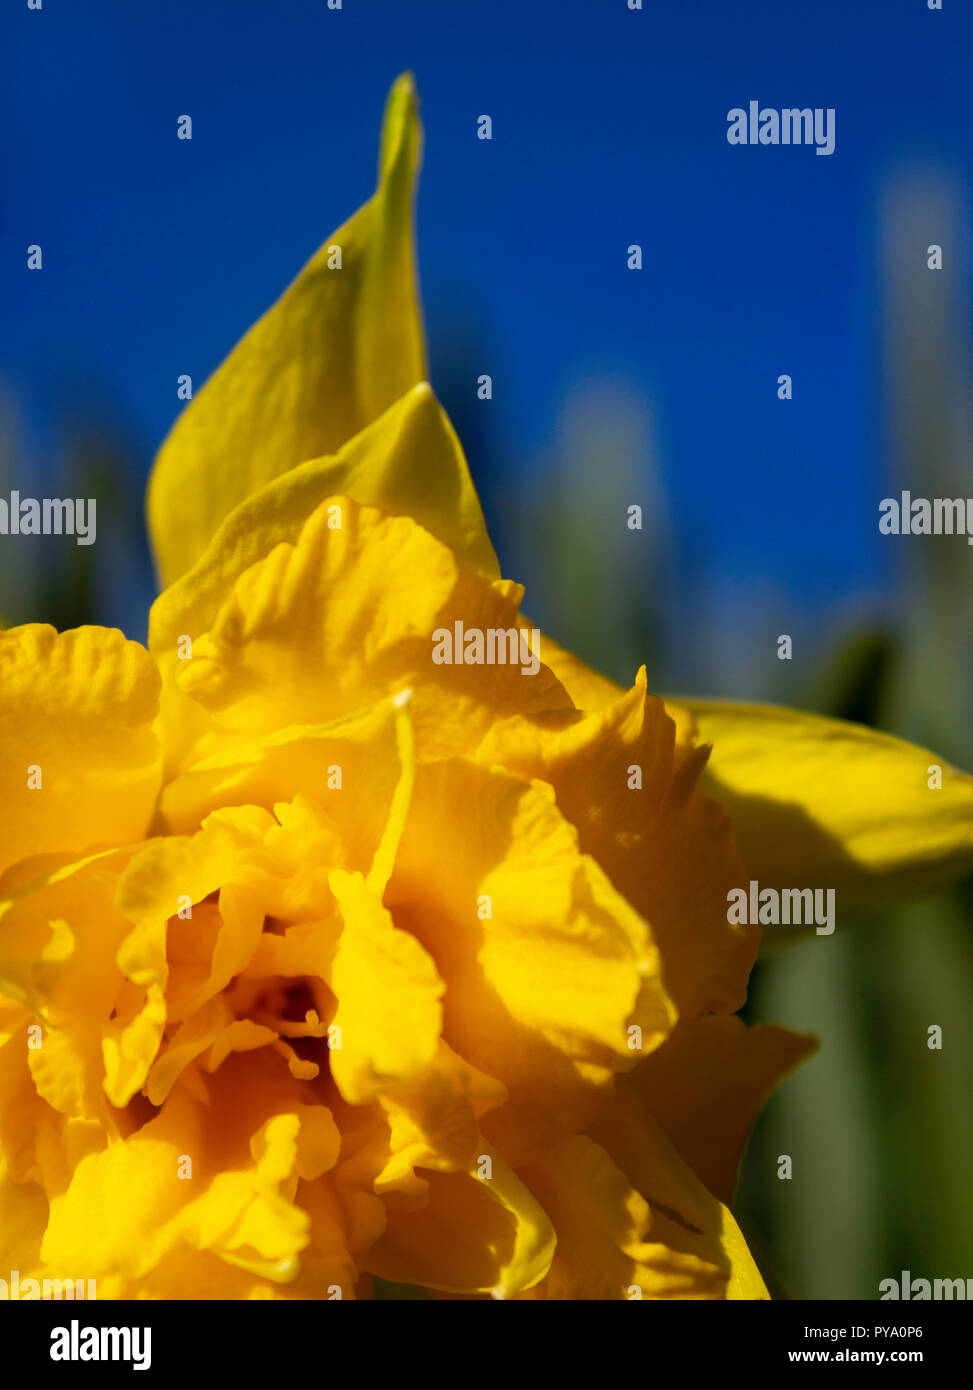 A close up image of a daffodil flower growing in a field against green leaves and a blue sky. Stock Photo